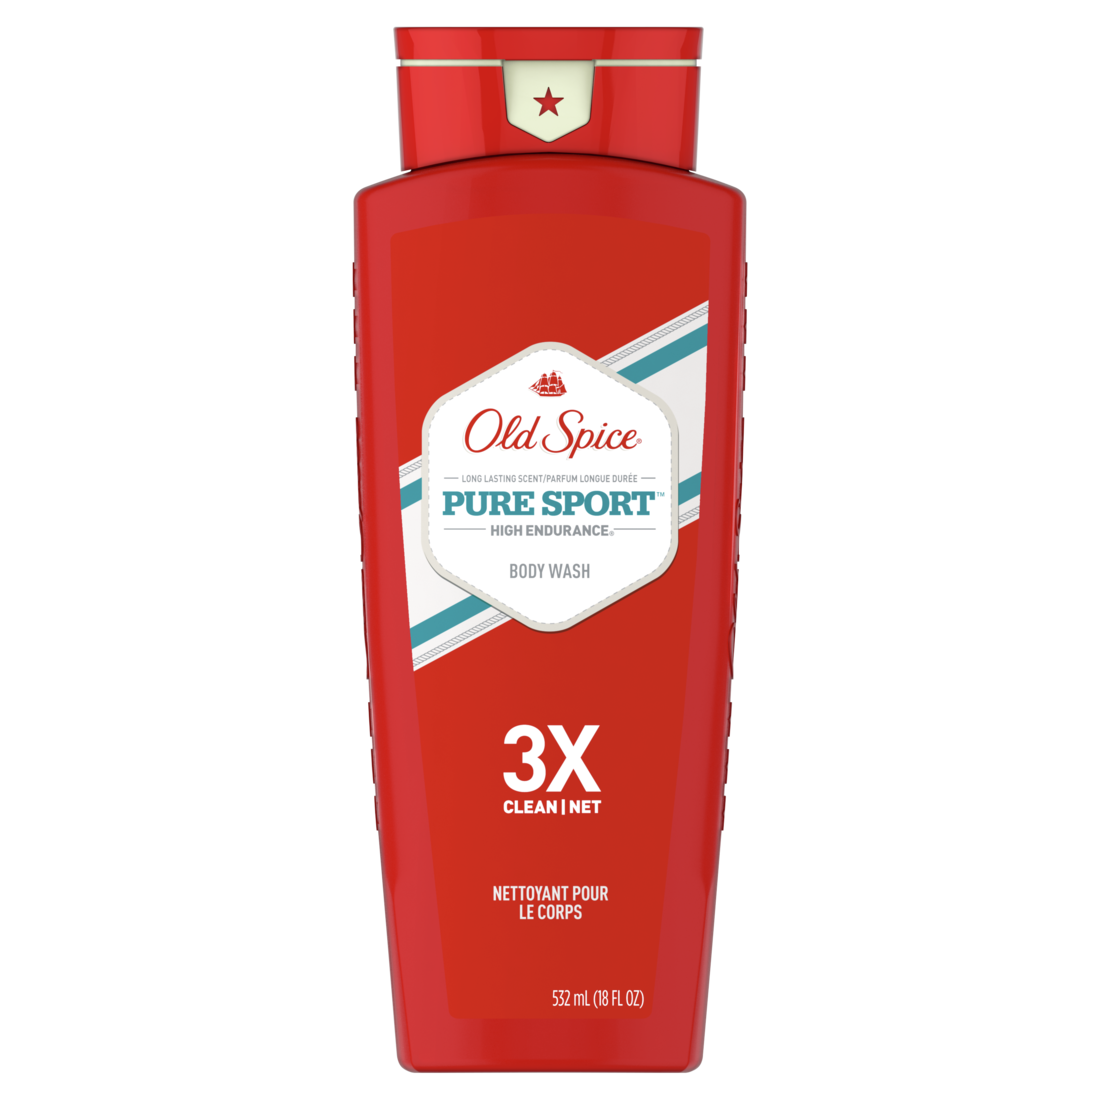 Old Spice High Endurance Pure Sport Scent Body Wash for Men - 18oz/4pk